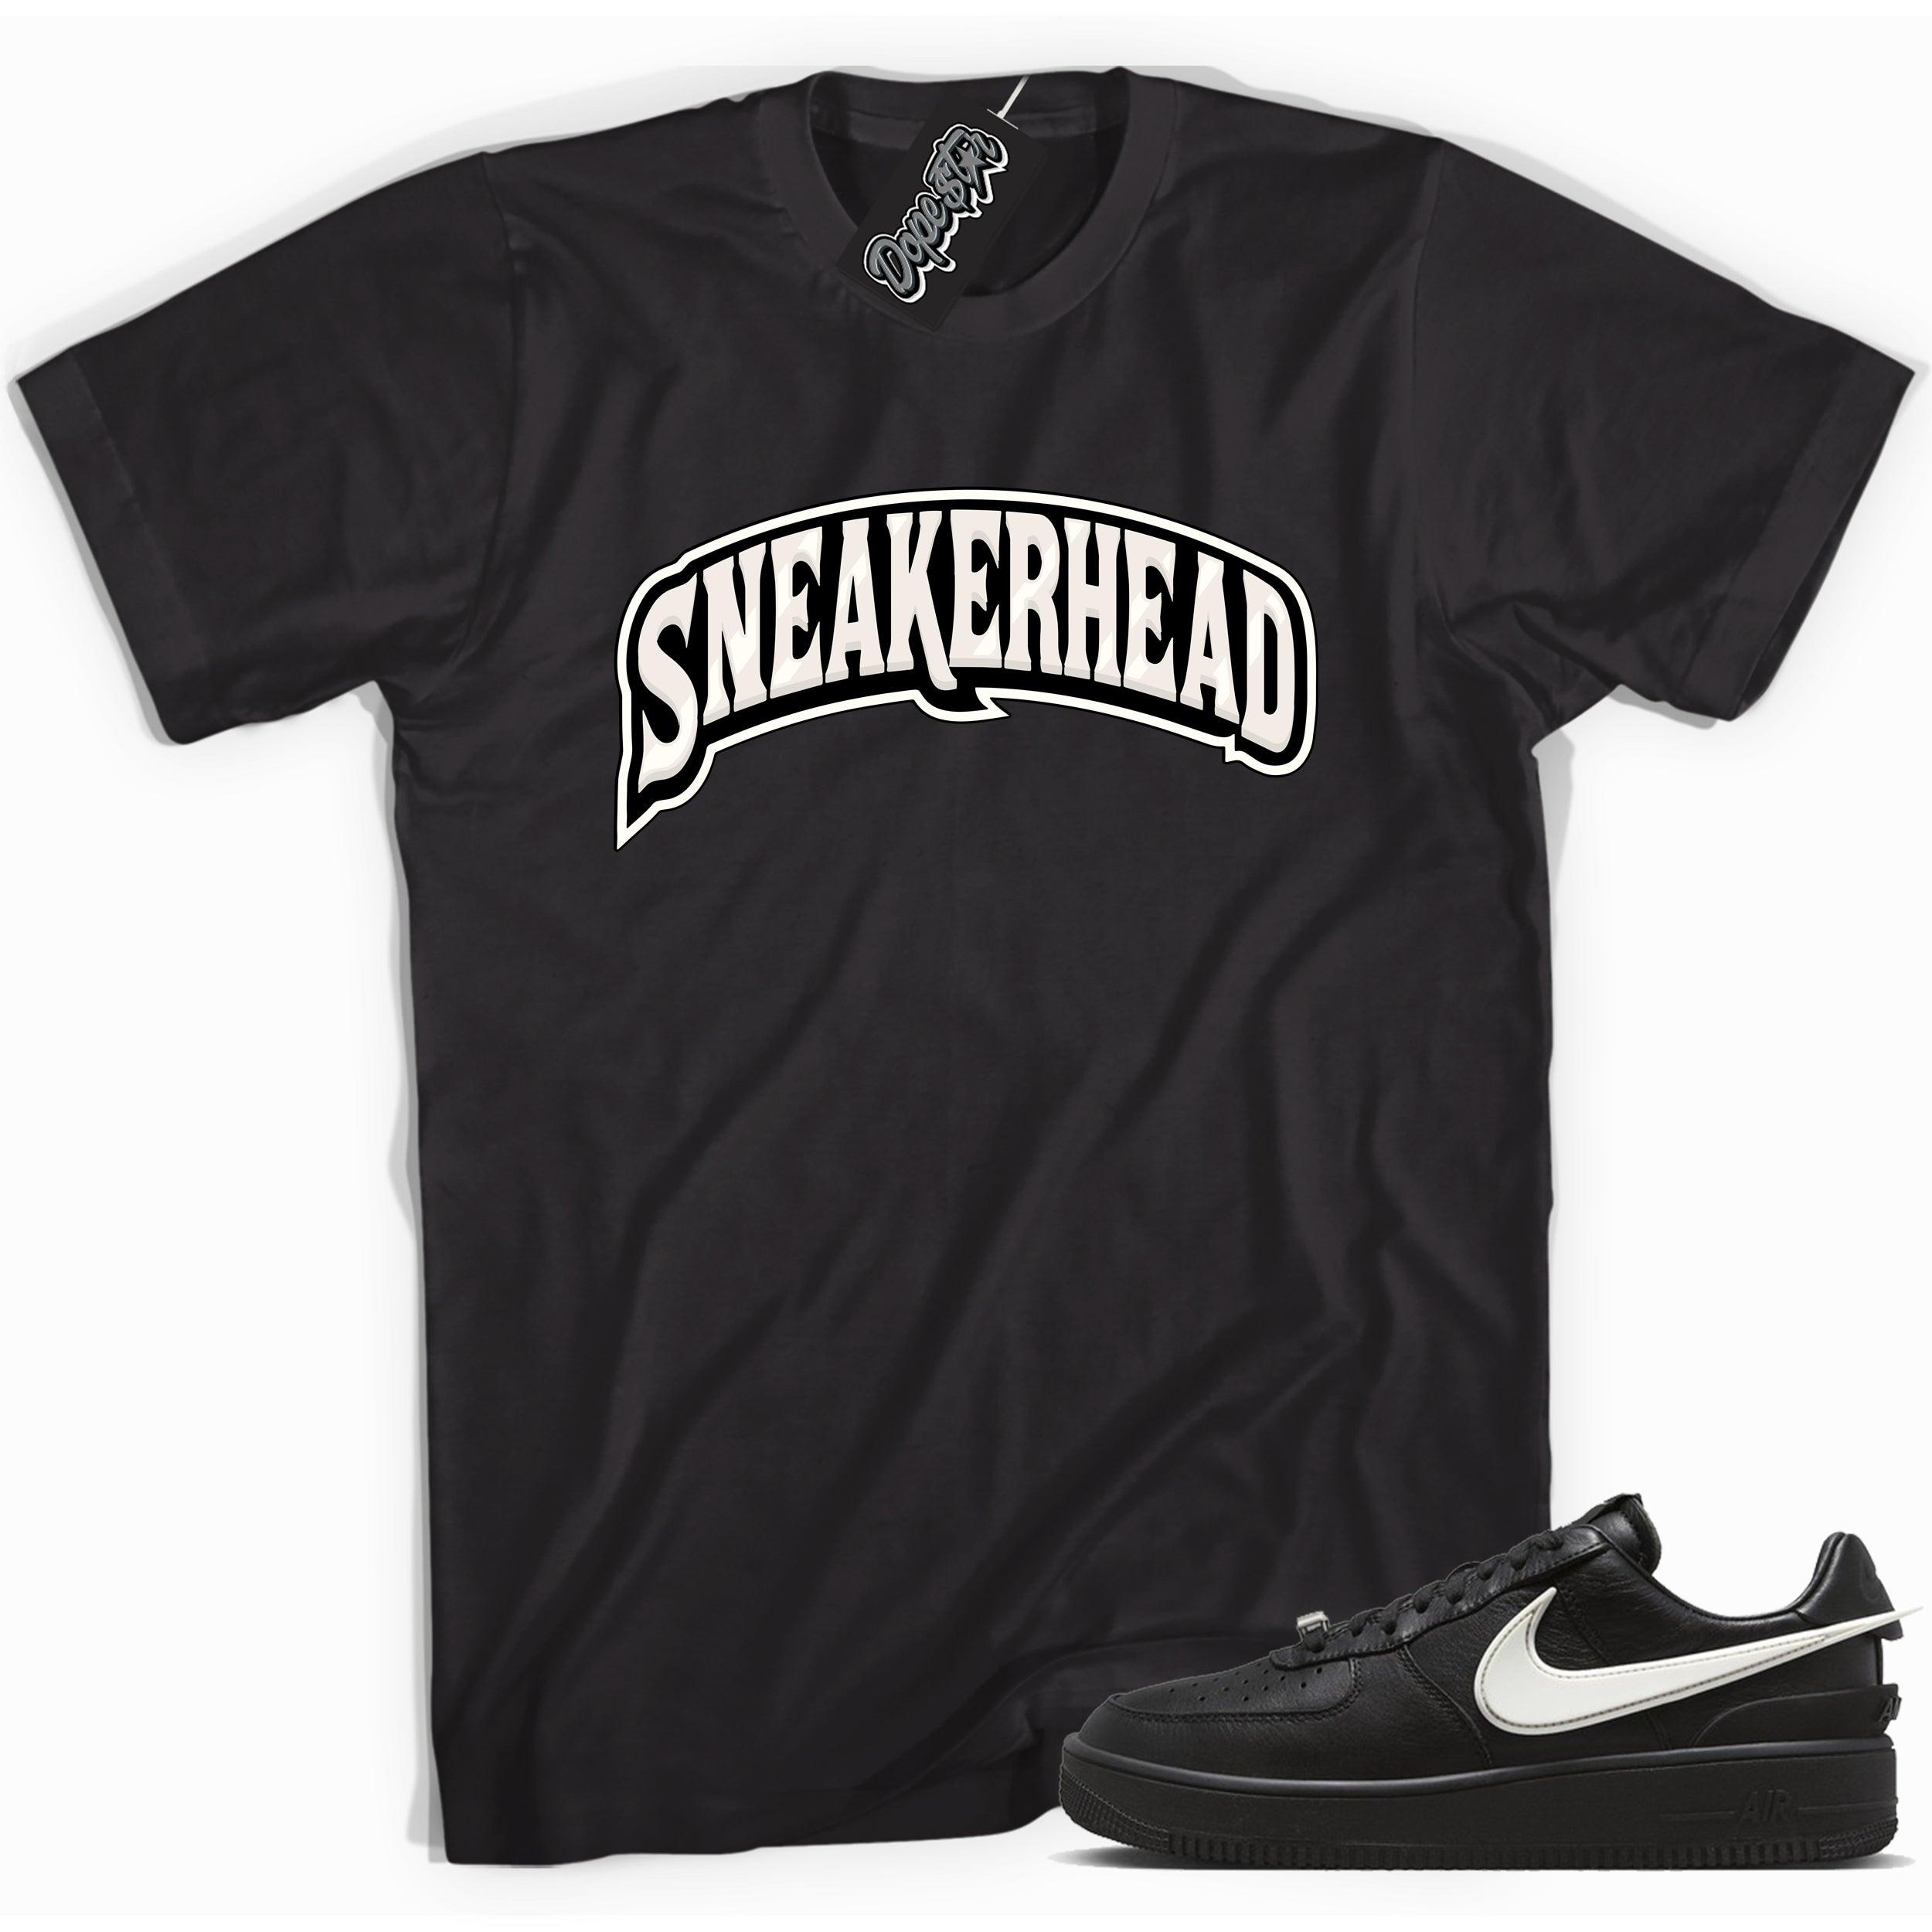 Cool black graphic tee with 'sneakerhead' print, that perfectly matches Nike Air Force 1 Low SP Ambush Phantom sneakers.